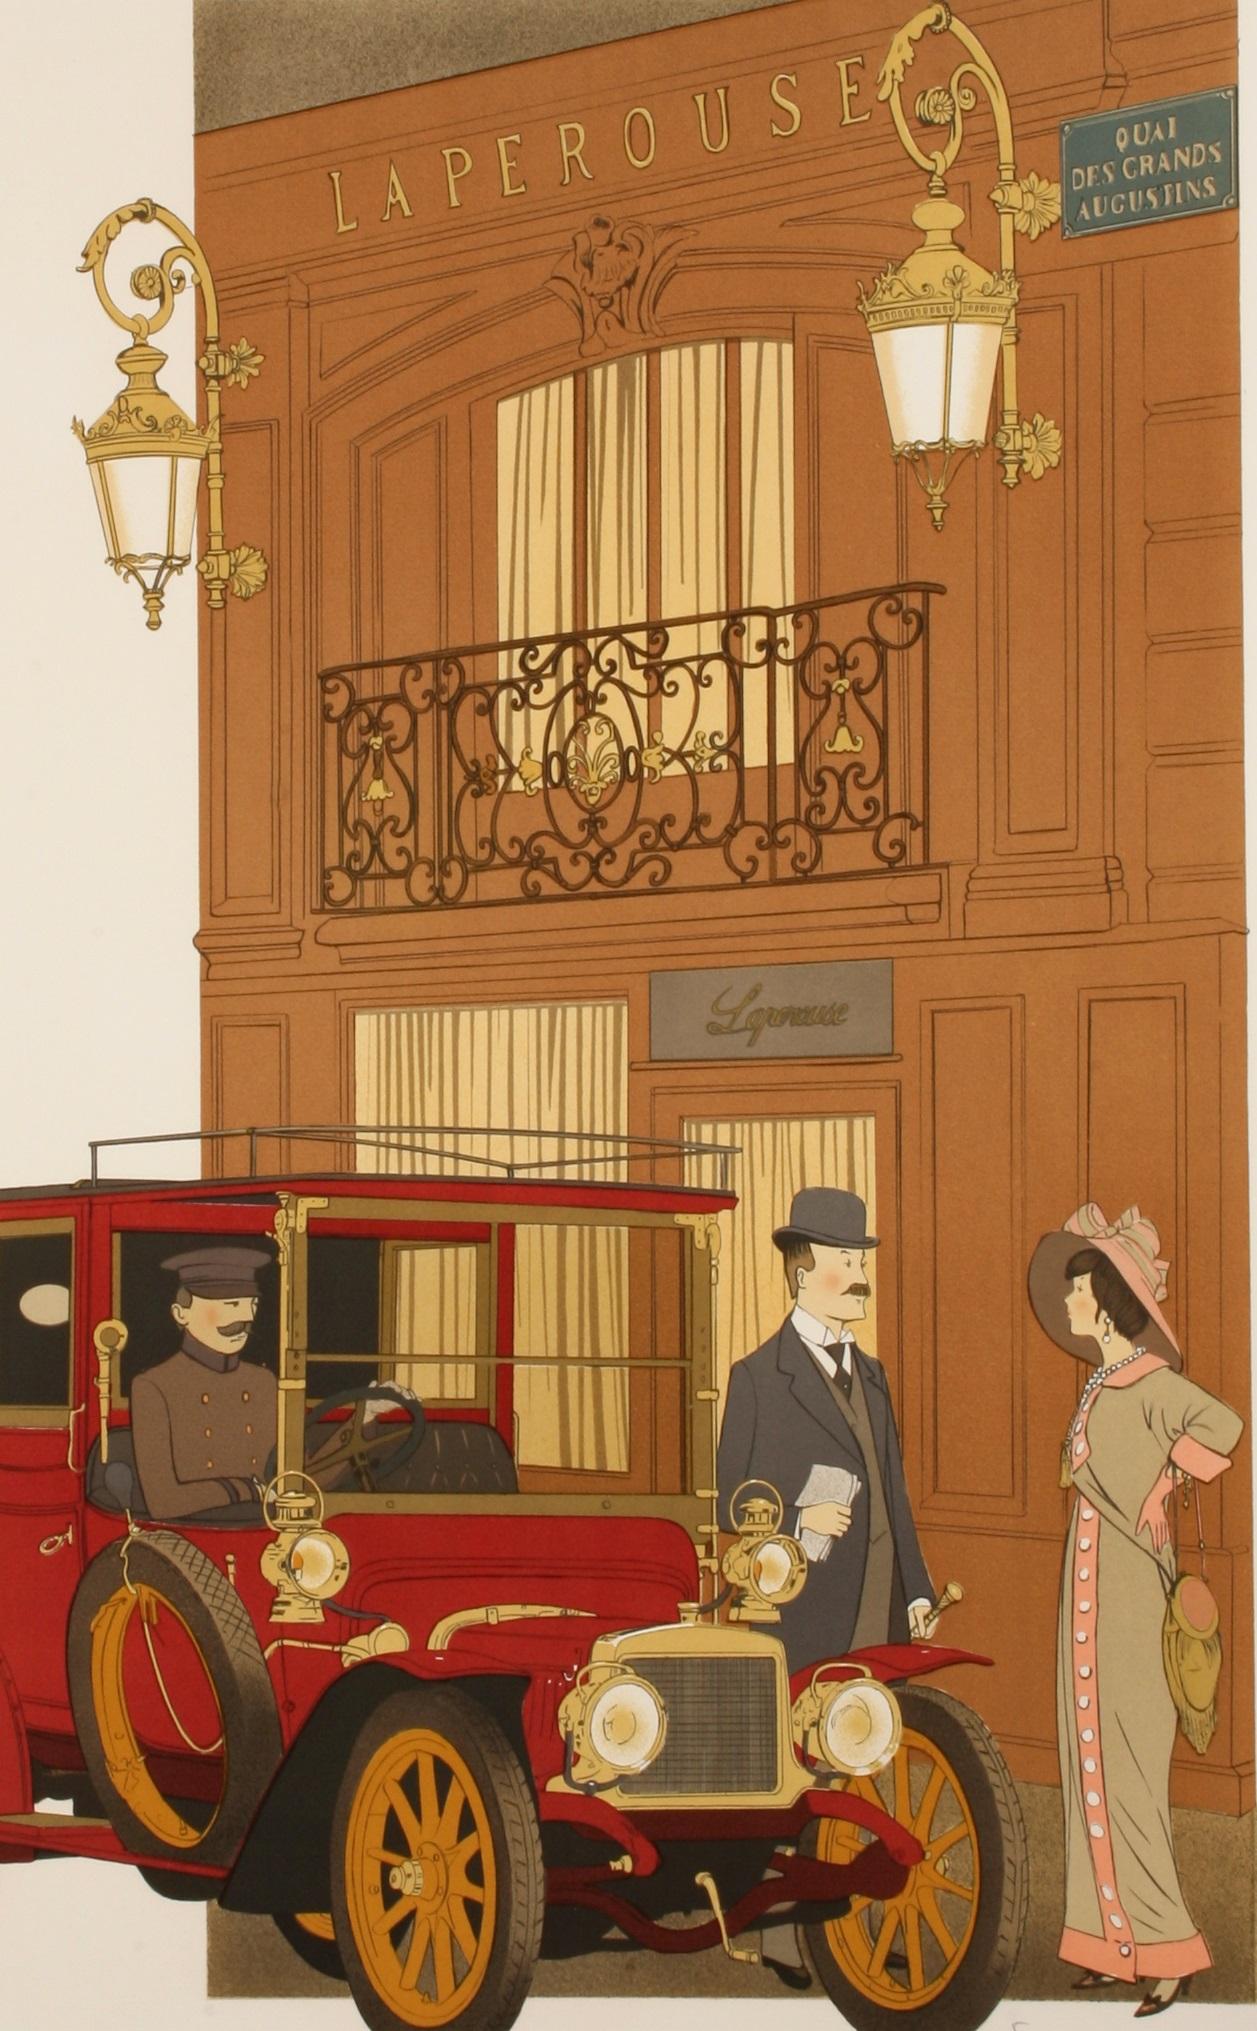 Original Vintage Poster-Nine Denis-Paul-La Perouse-Paris, c.1979

The immerses artist us in the Paris of the 20s. A because is parked in front of La Perouse, a historic restaurant Quai des Grands Augustins facing the Seine.
It is located in a